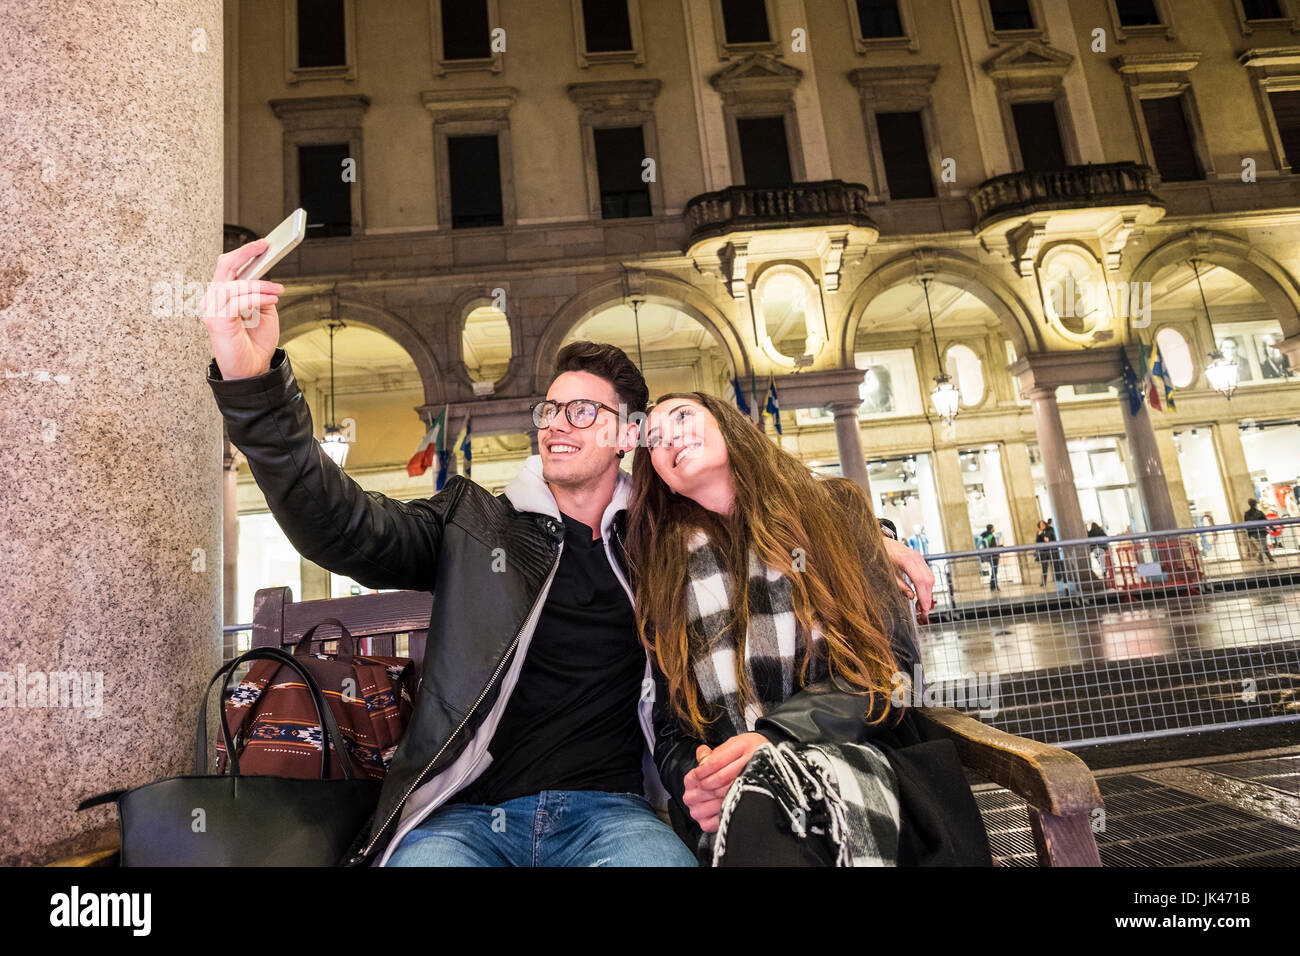 Caucasian couple sitting on urban bench posing for cell phone selfie Stock Photo